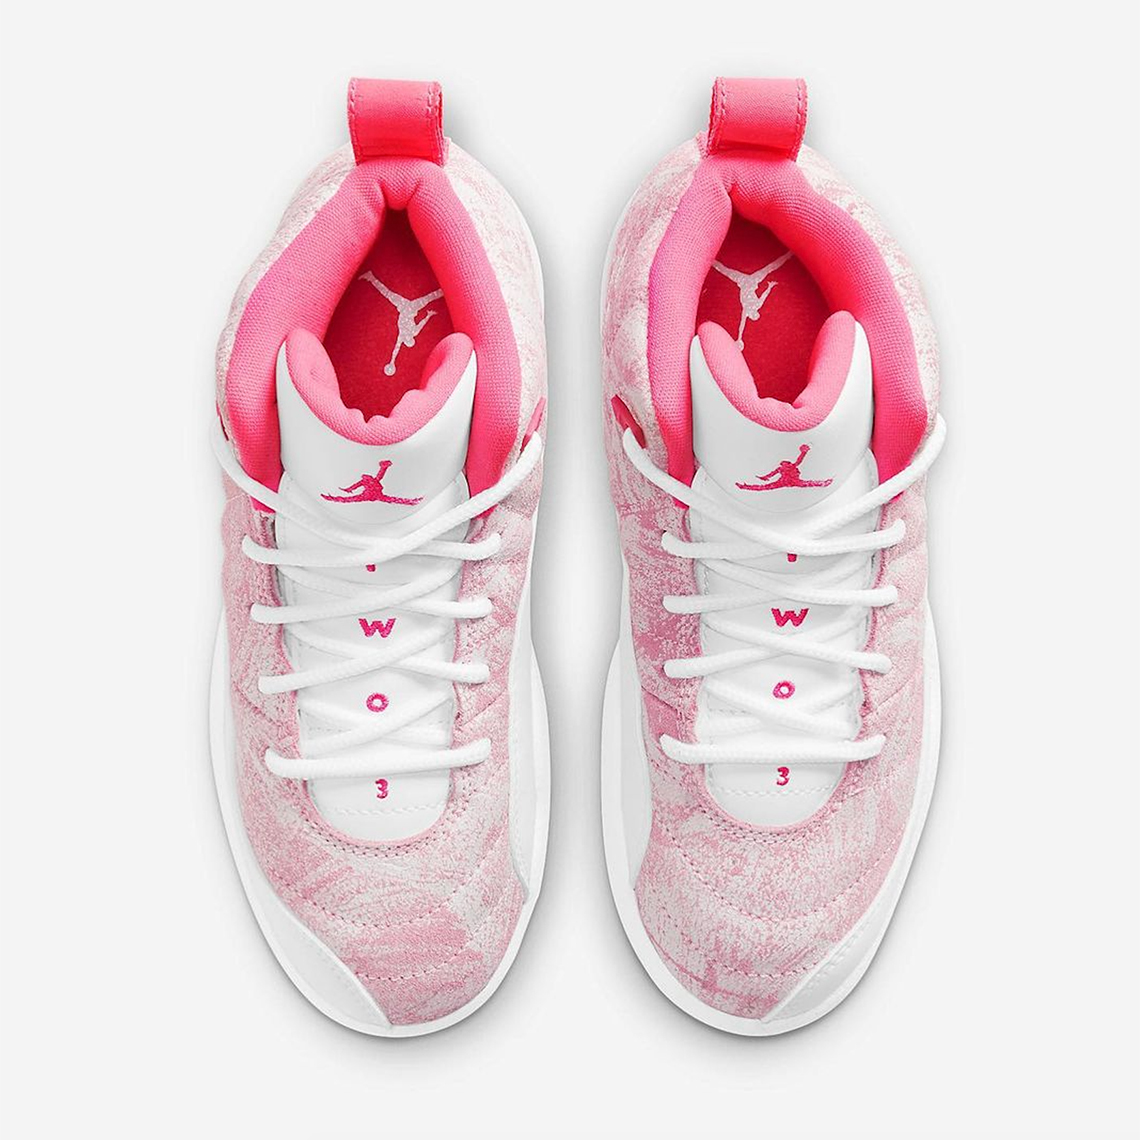 pink and white shoes jordans